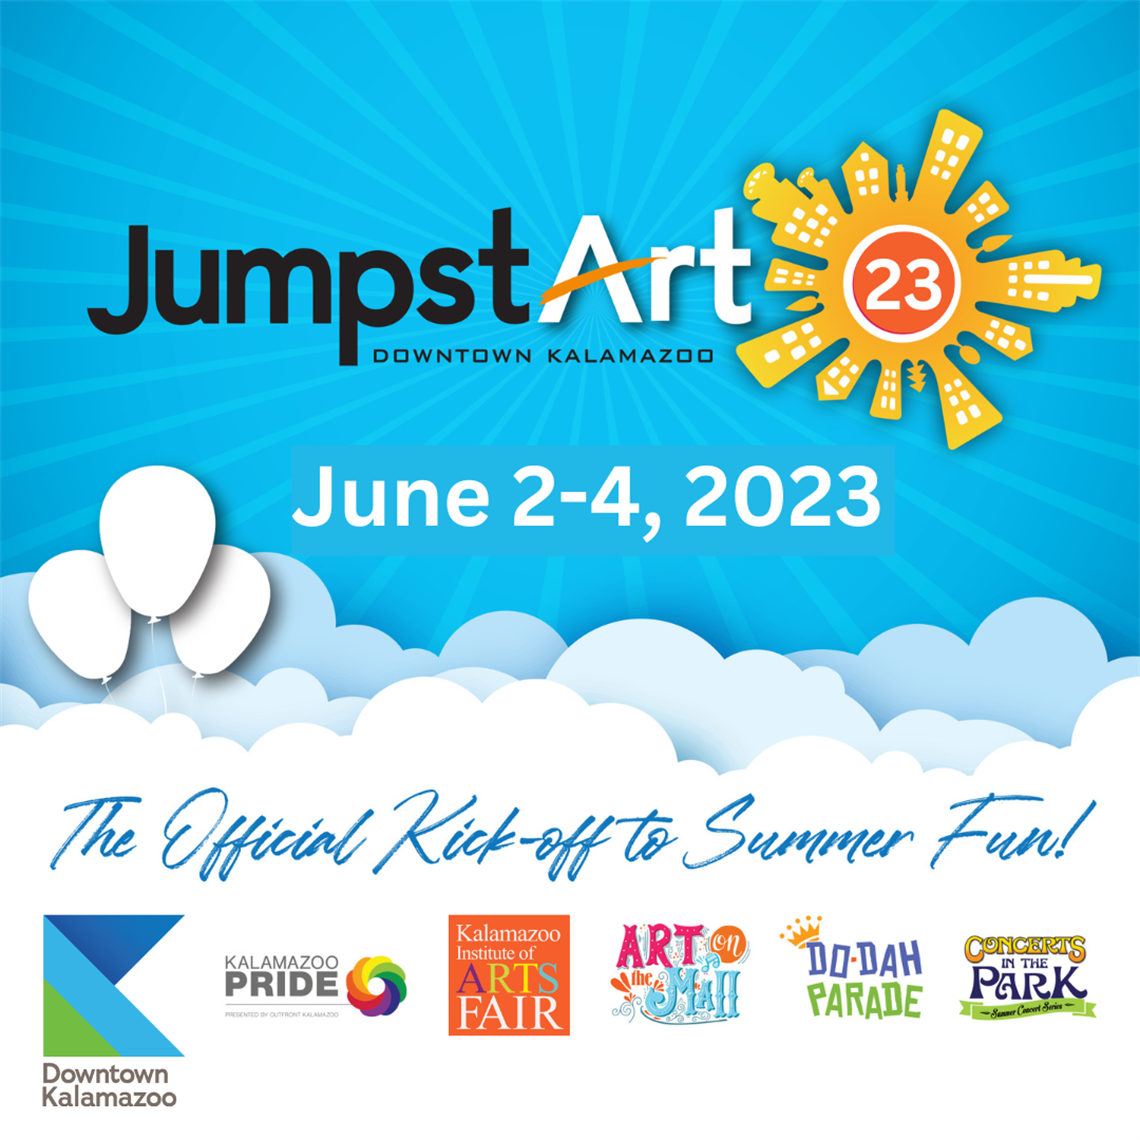 Graphic promotion for 2023 JumpstART weekend